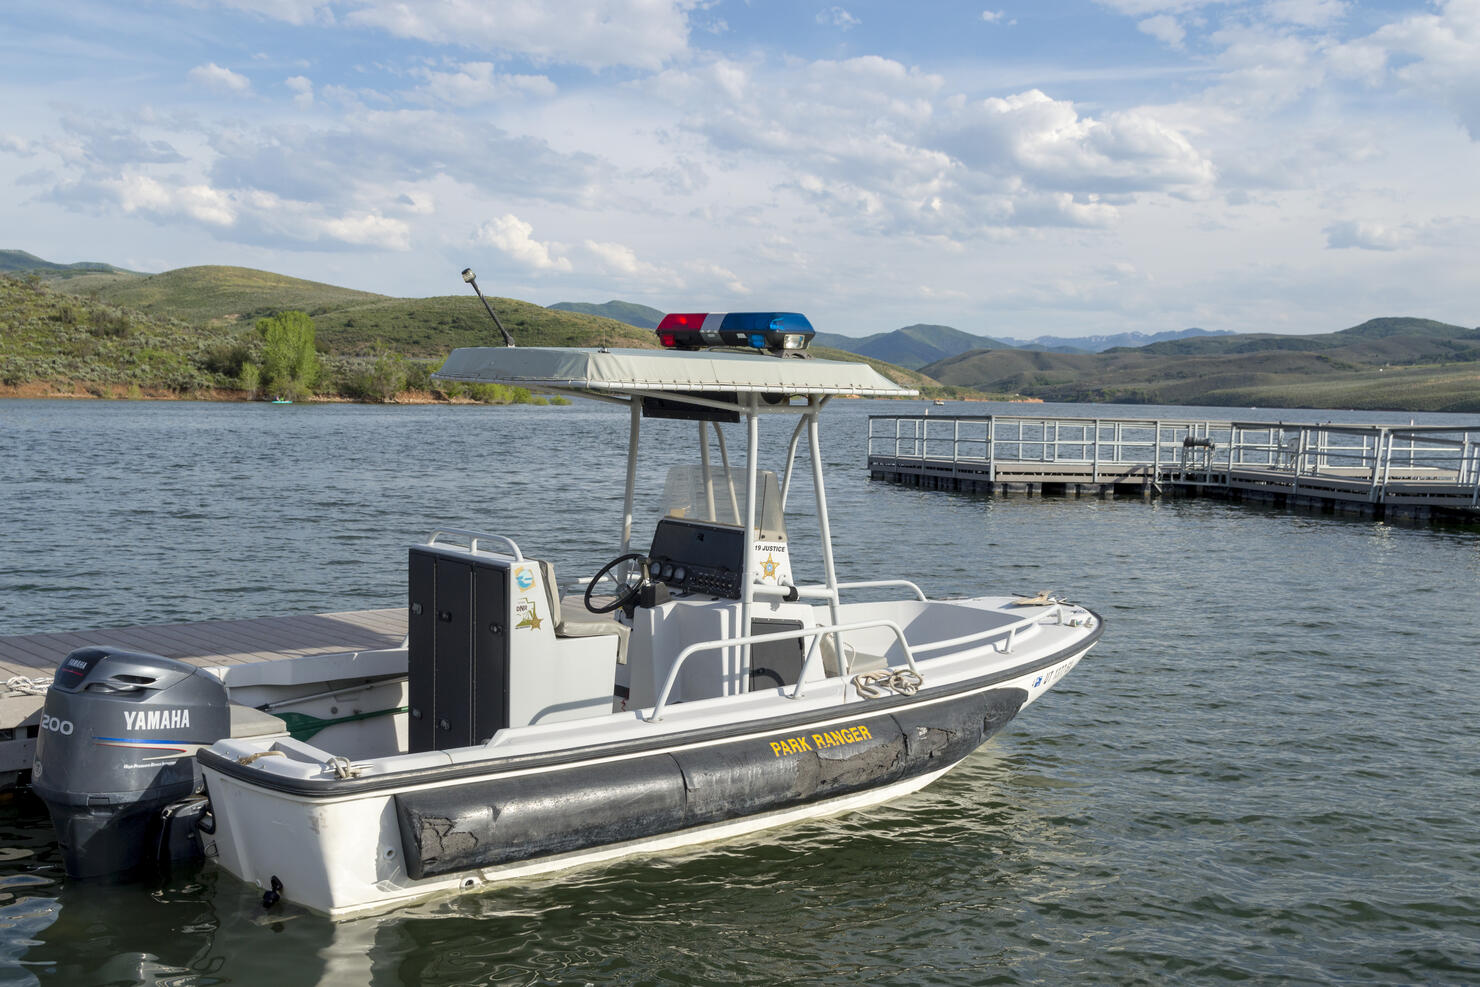 Ranger Police Boat Docked on the Water at East Canyon Reservoir